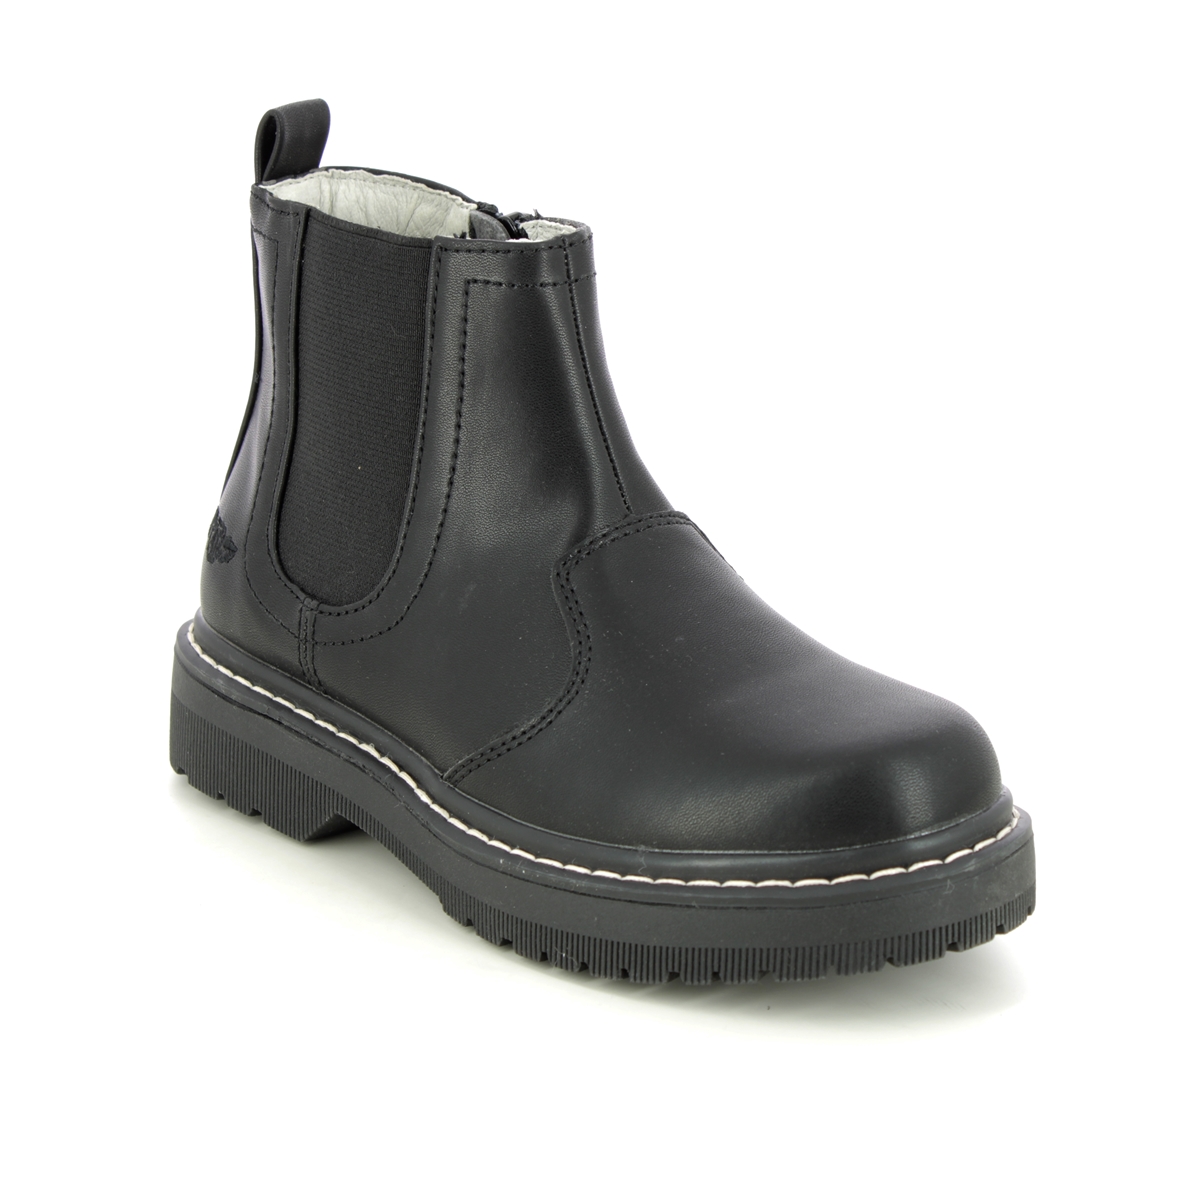 Lelli Kelly Ruth Chelsea Black leather Kids Girls boots LK5552-AB01 in a Plain Man-made in Size 30